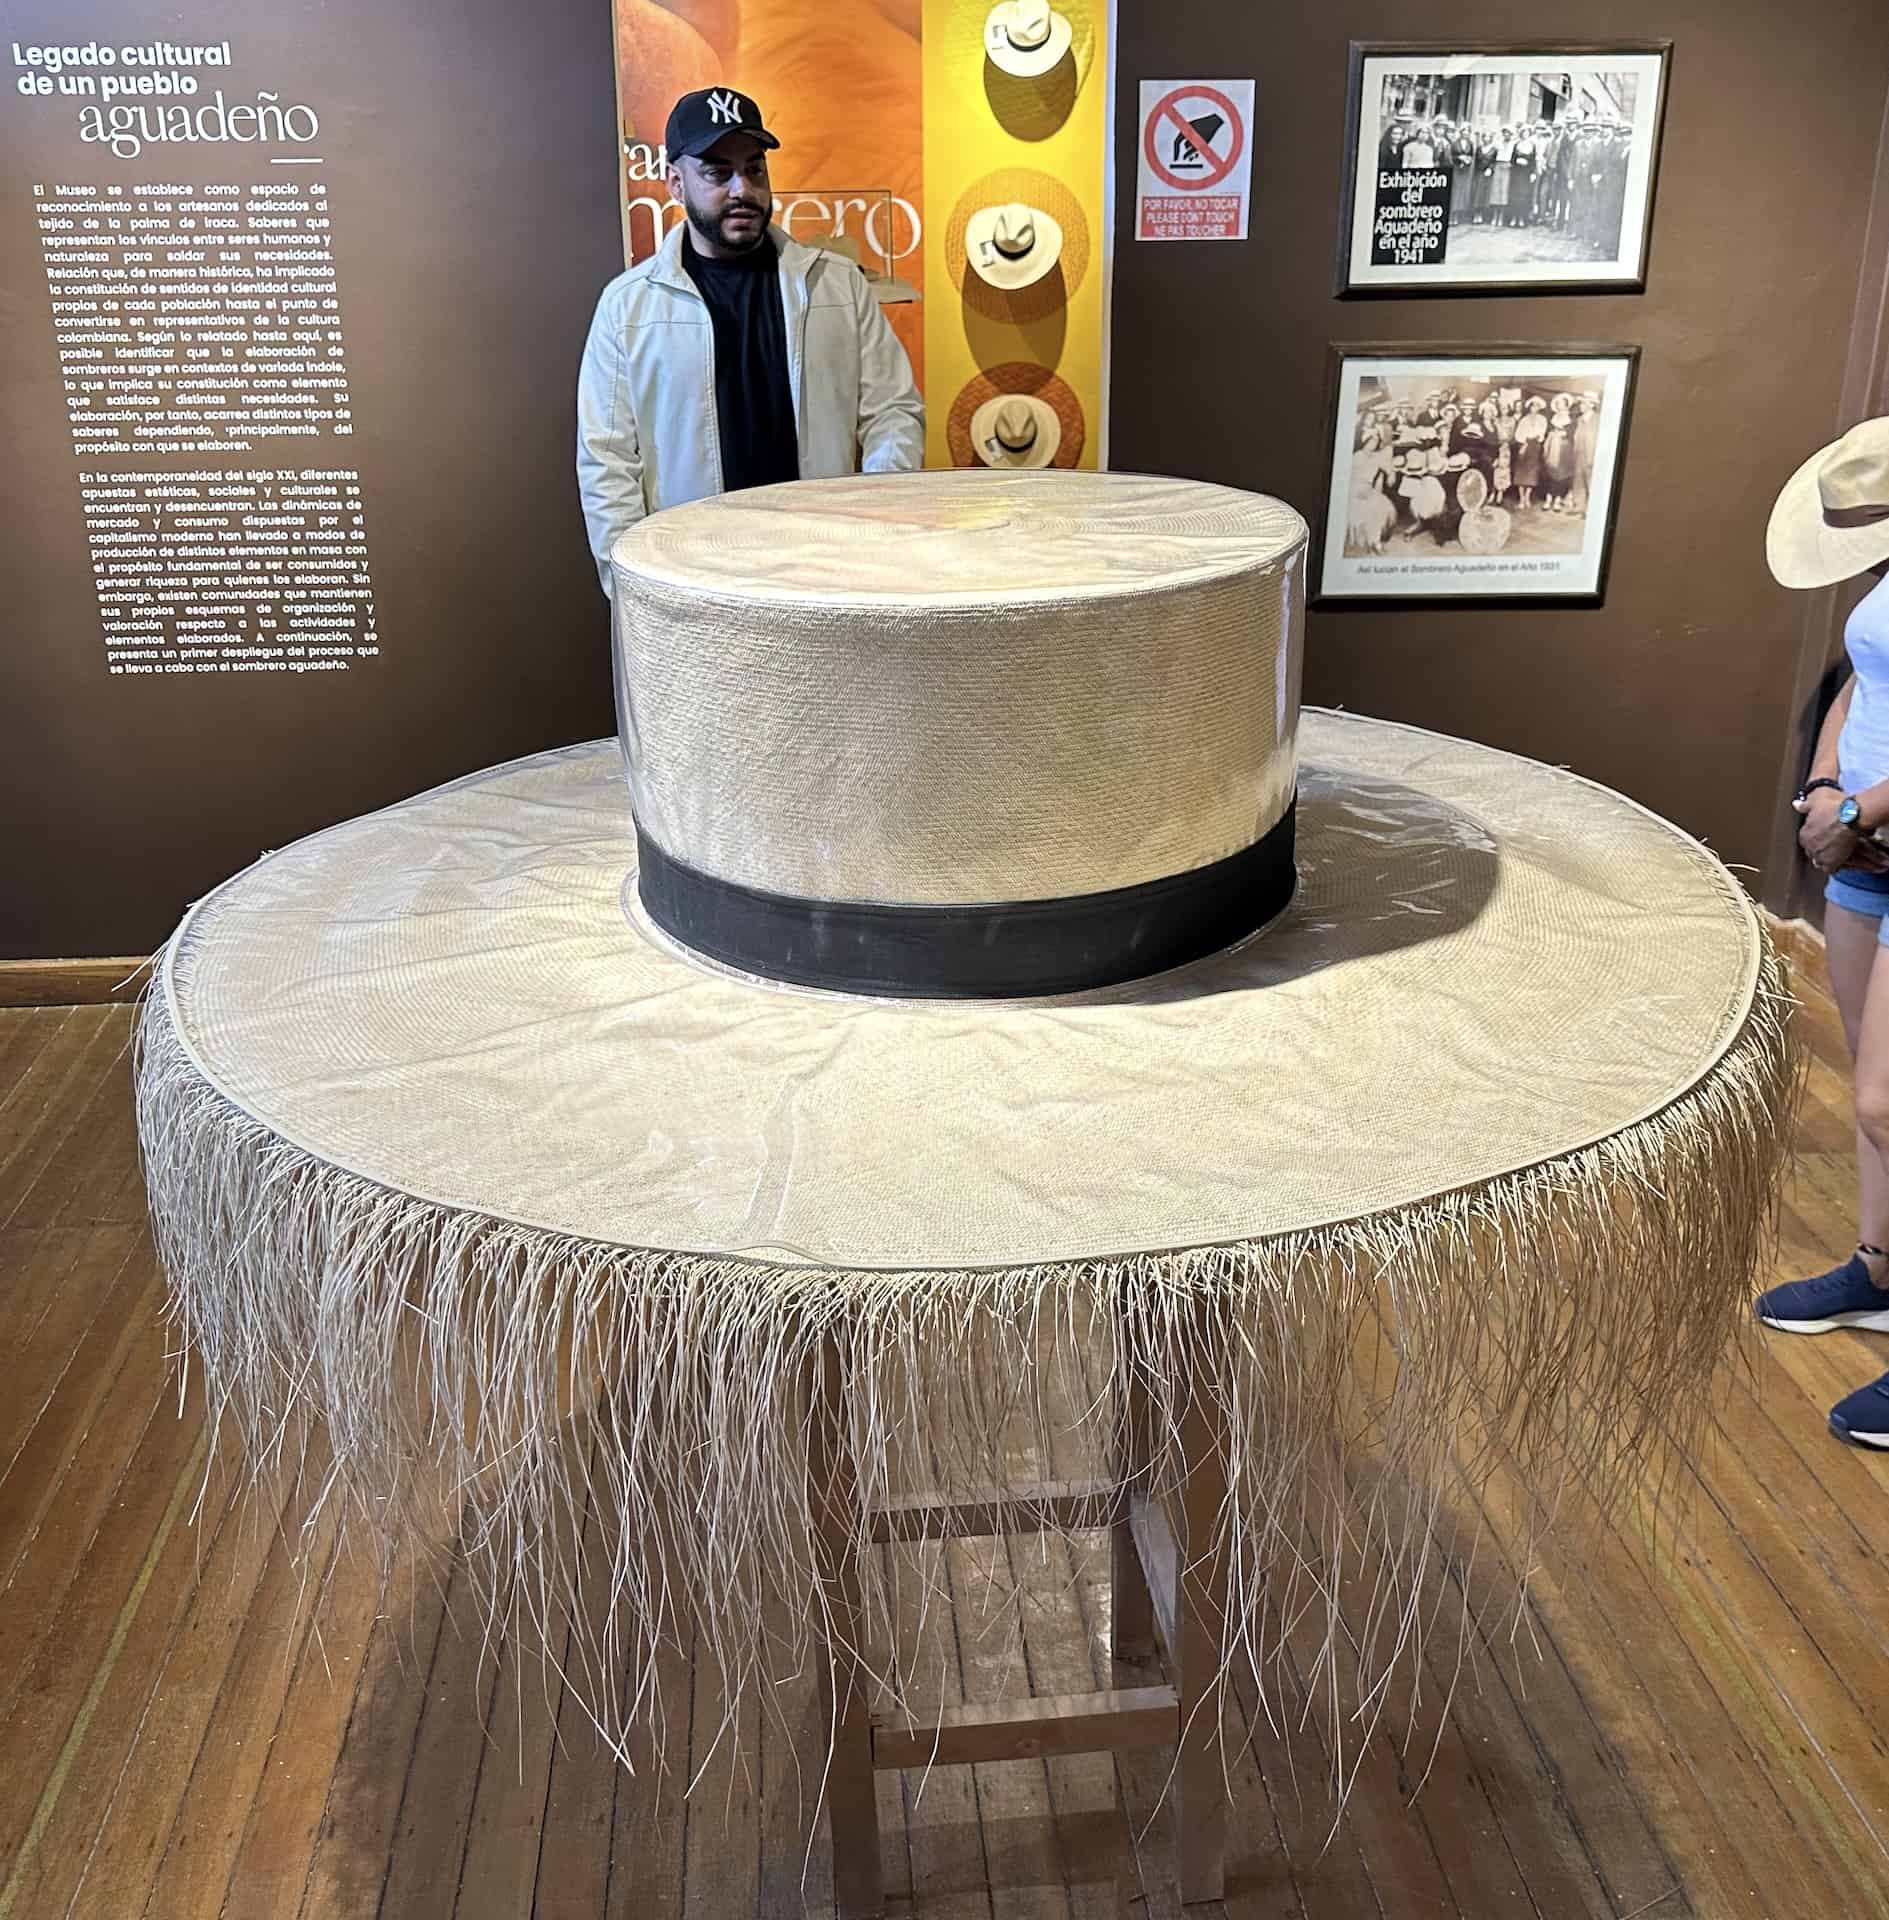 The world's largest sombrero aguadeño at the National Museum of Hats at the Francisco Giraldo Cultural Center in Aguadas, Caldas, Colombia